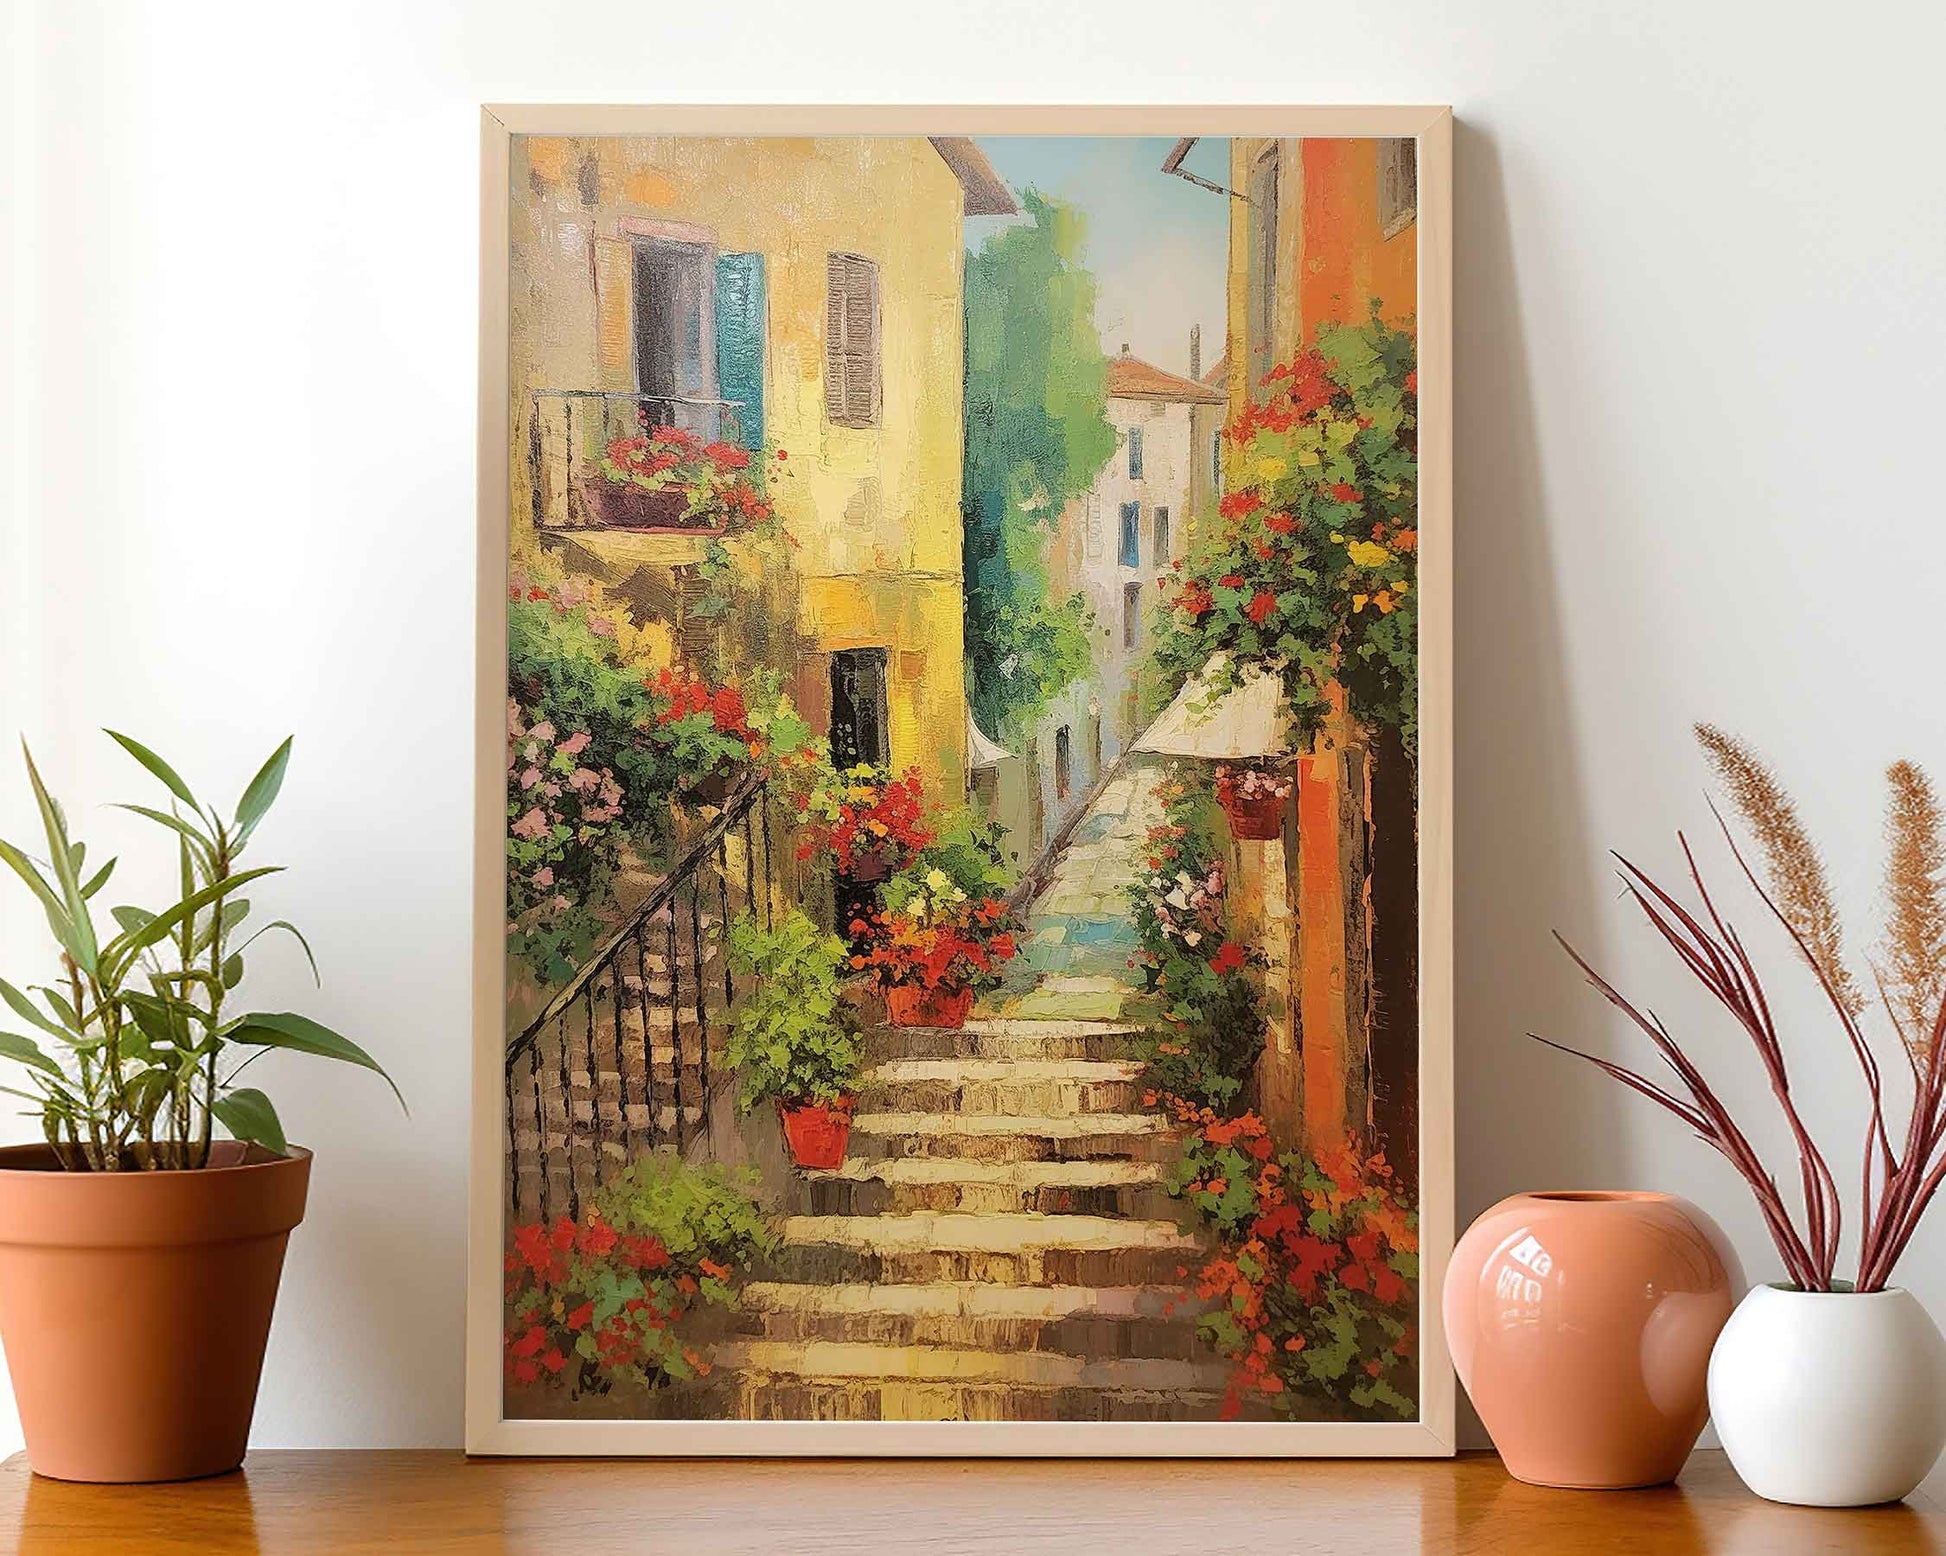 Framed Image of Italian Scenic Landscapes & Lifestyle Travel Wall Art Prints of Italy